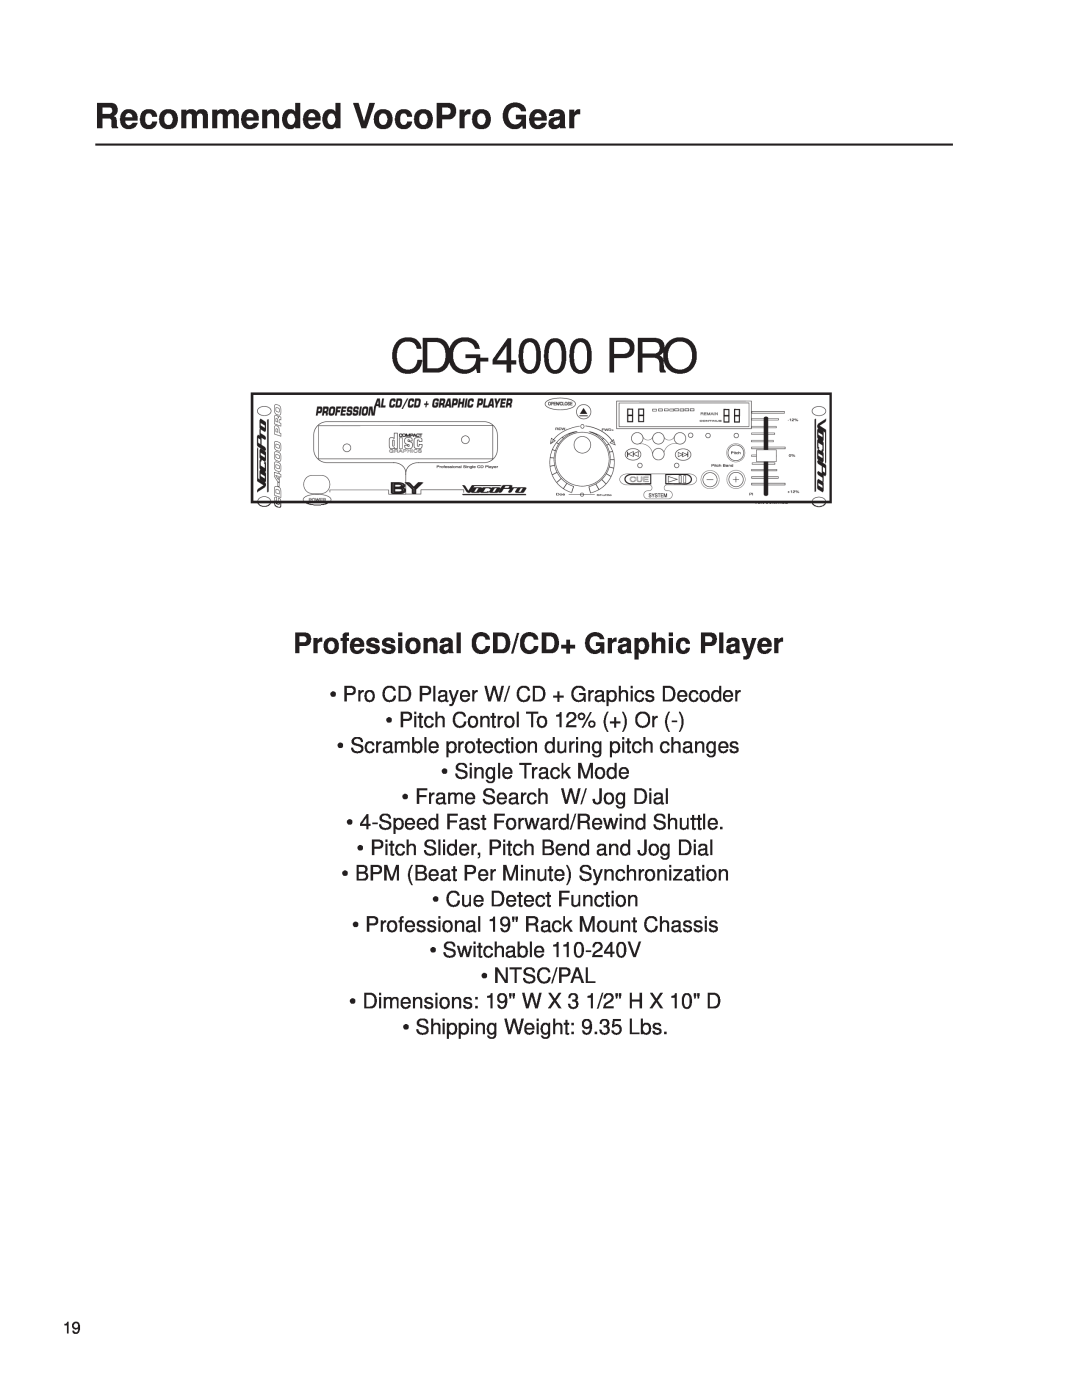 VocoPro DA-3600Pro2 owner manual CDG-4000PRO, Recommended VocoPro Gear, Professional CD/CD+ Graphic Player 